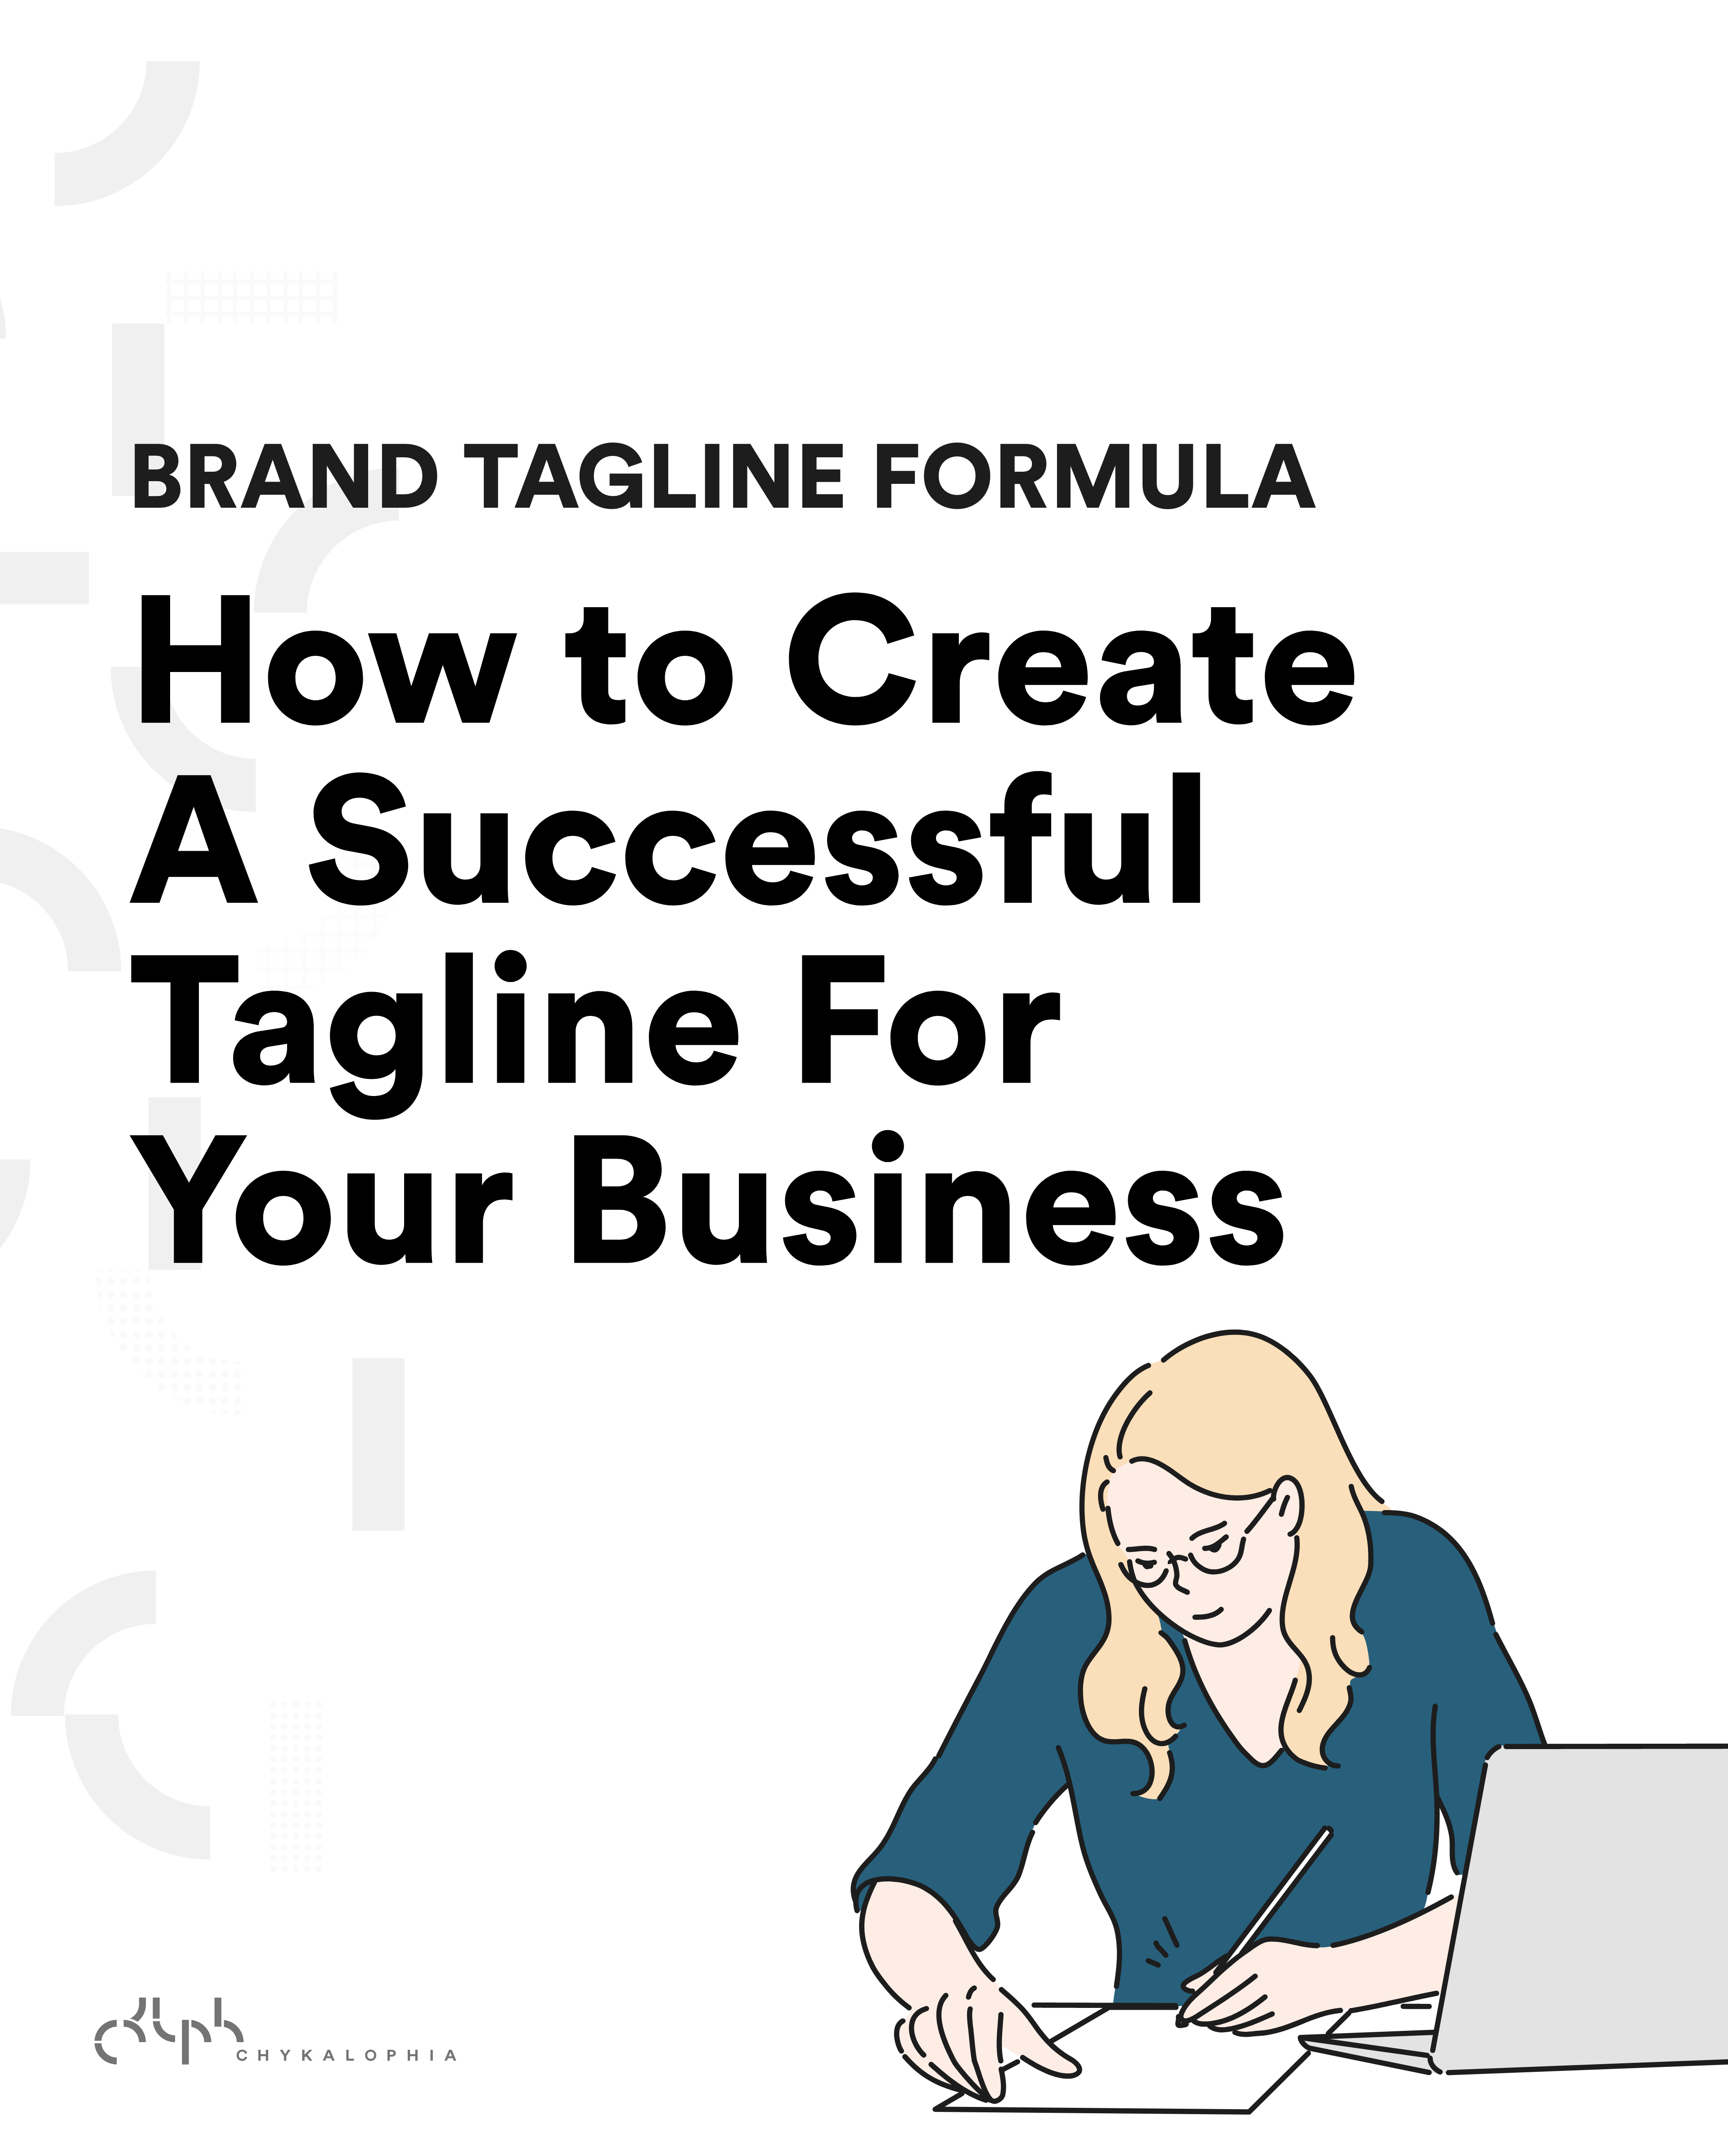 How to create a tagline for your brand easily - Chykalophia